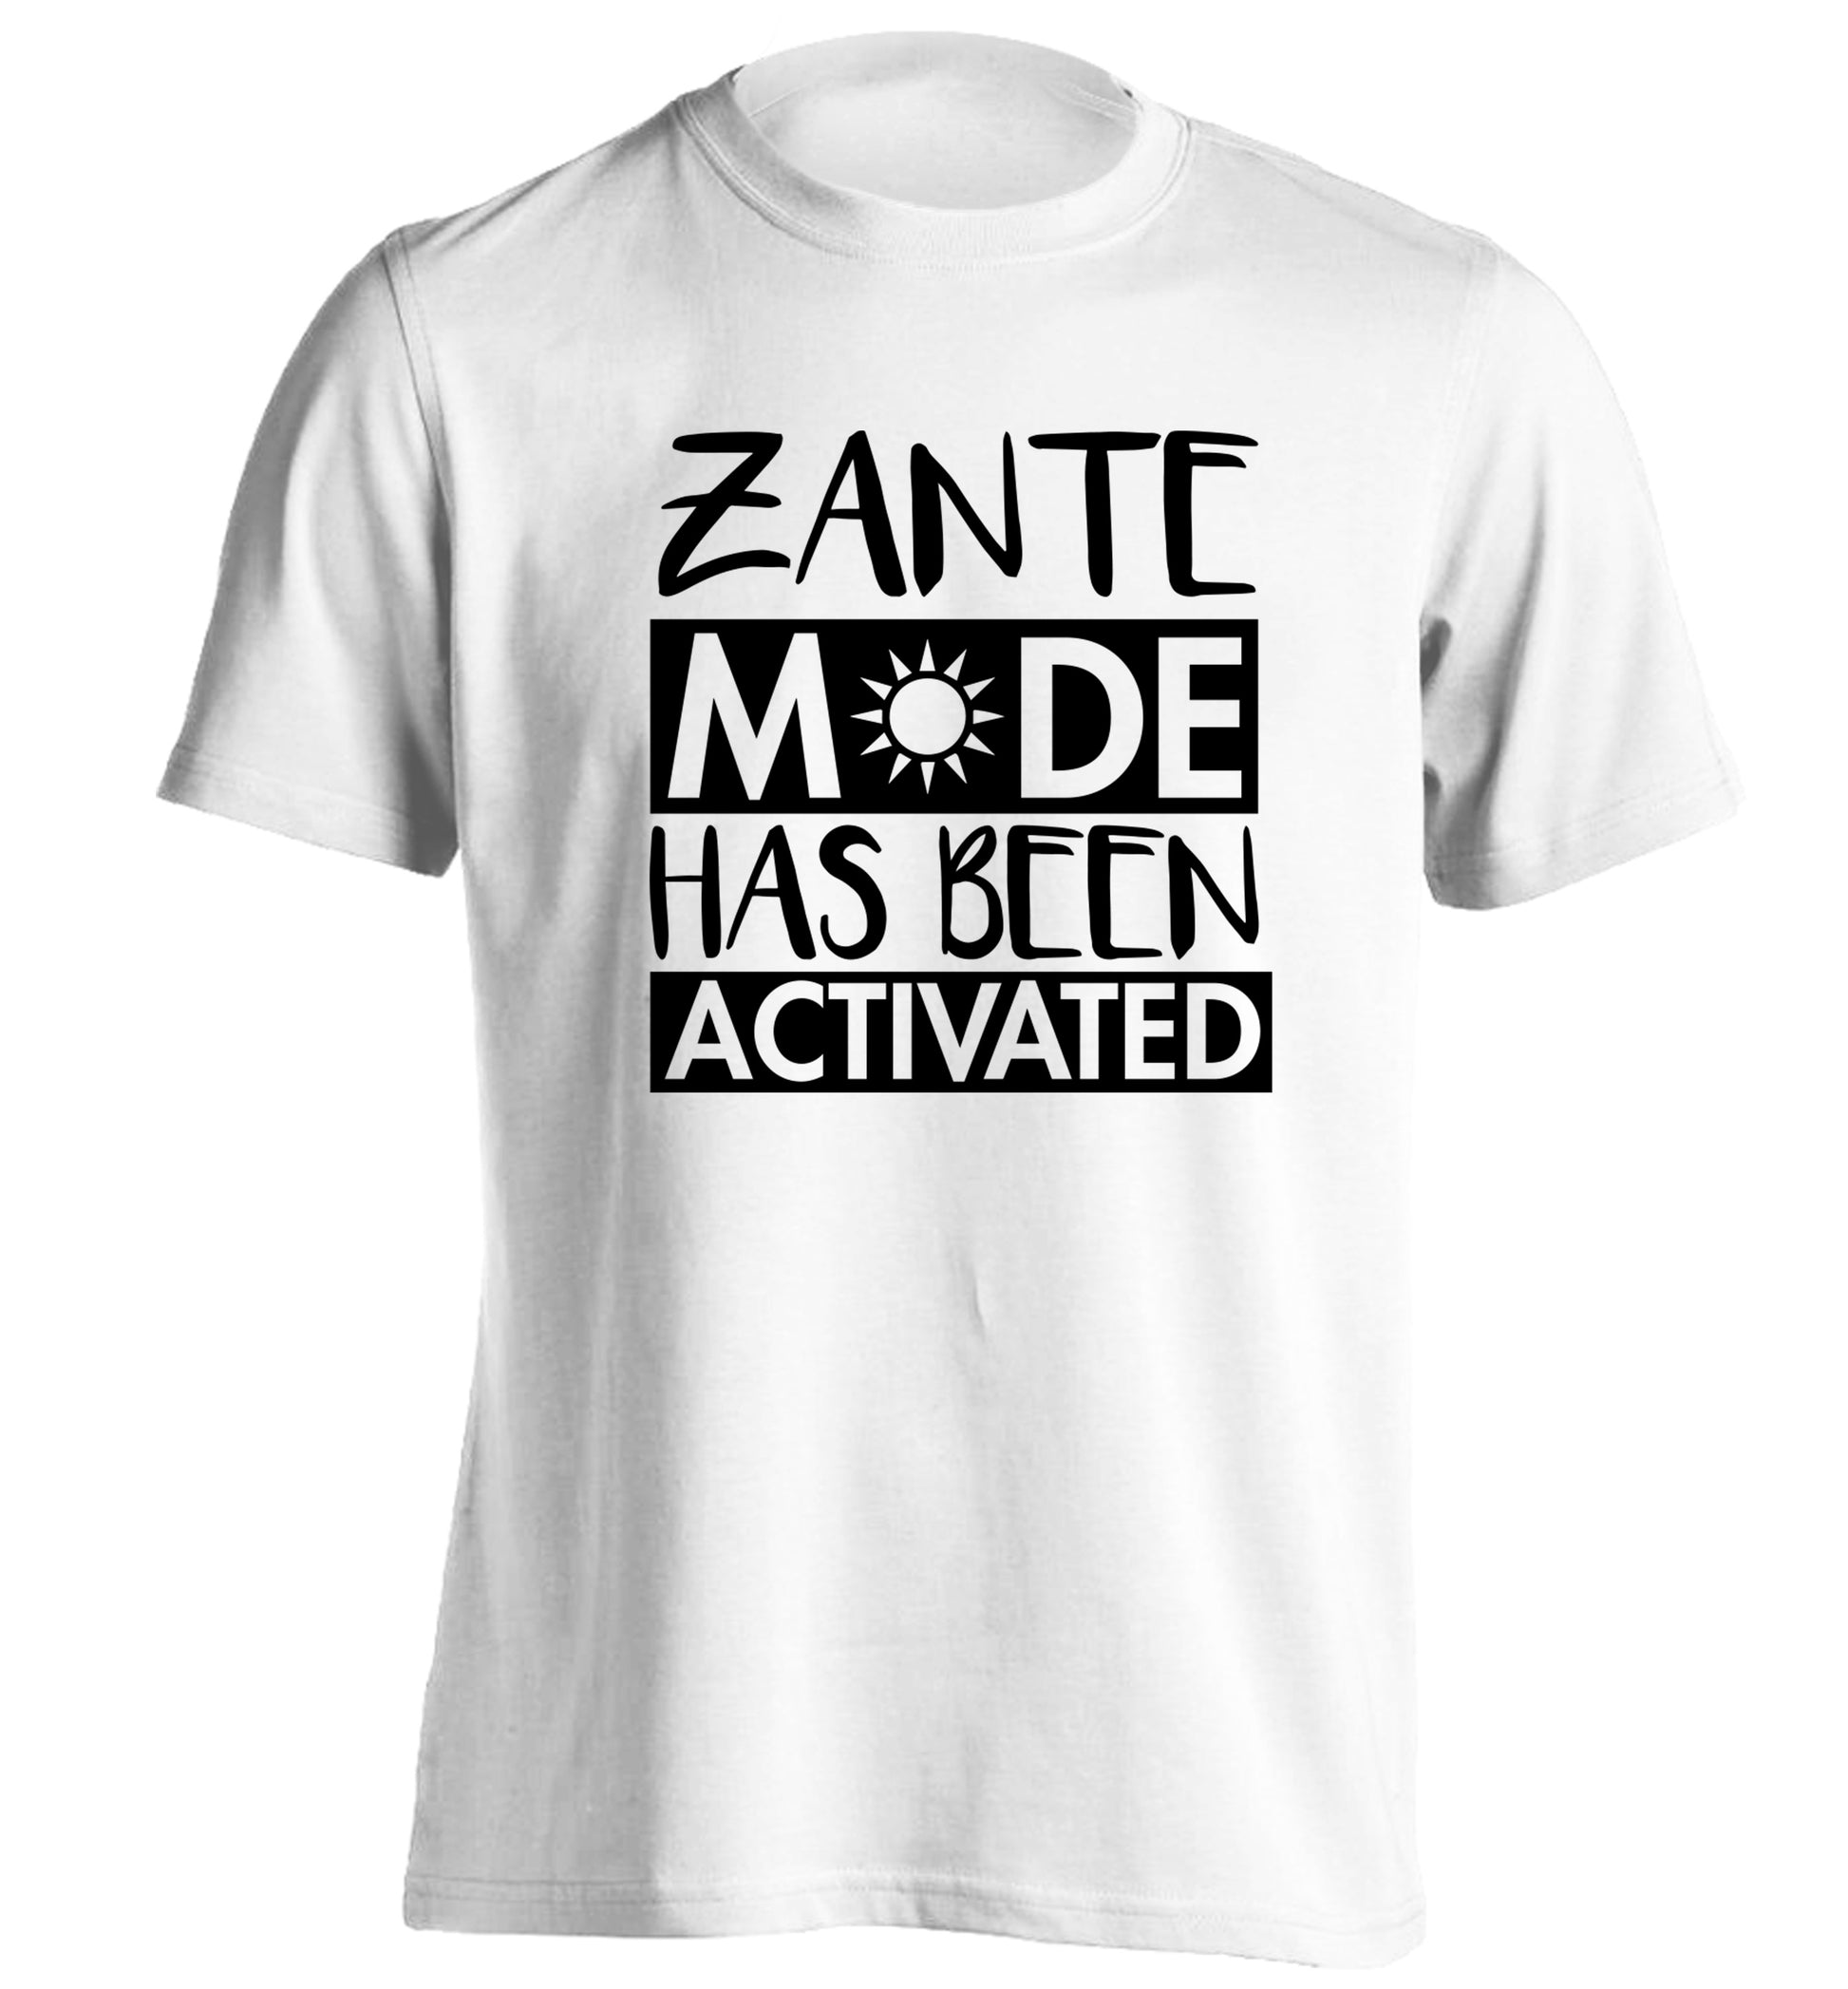 Zante mode has been activated adults unisex white Tshirt 2XL